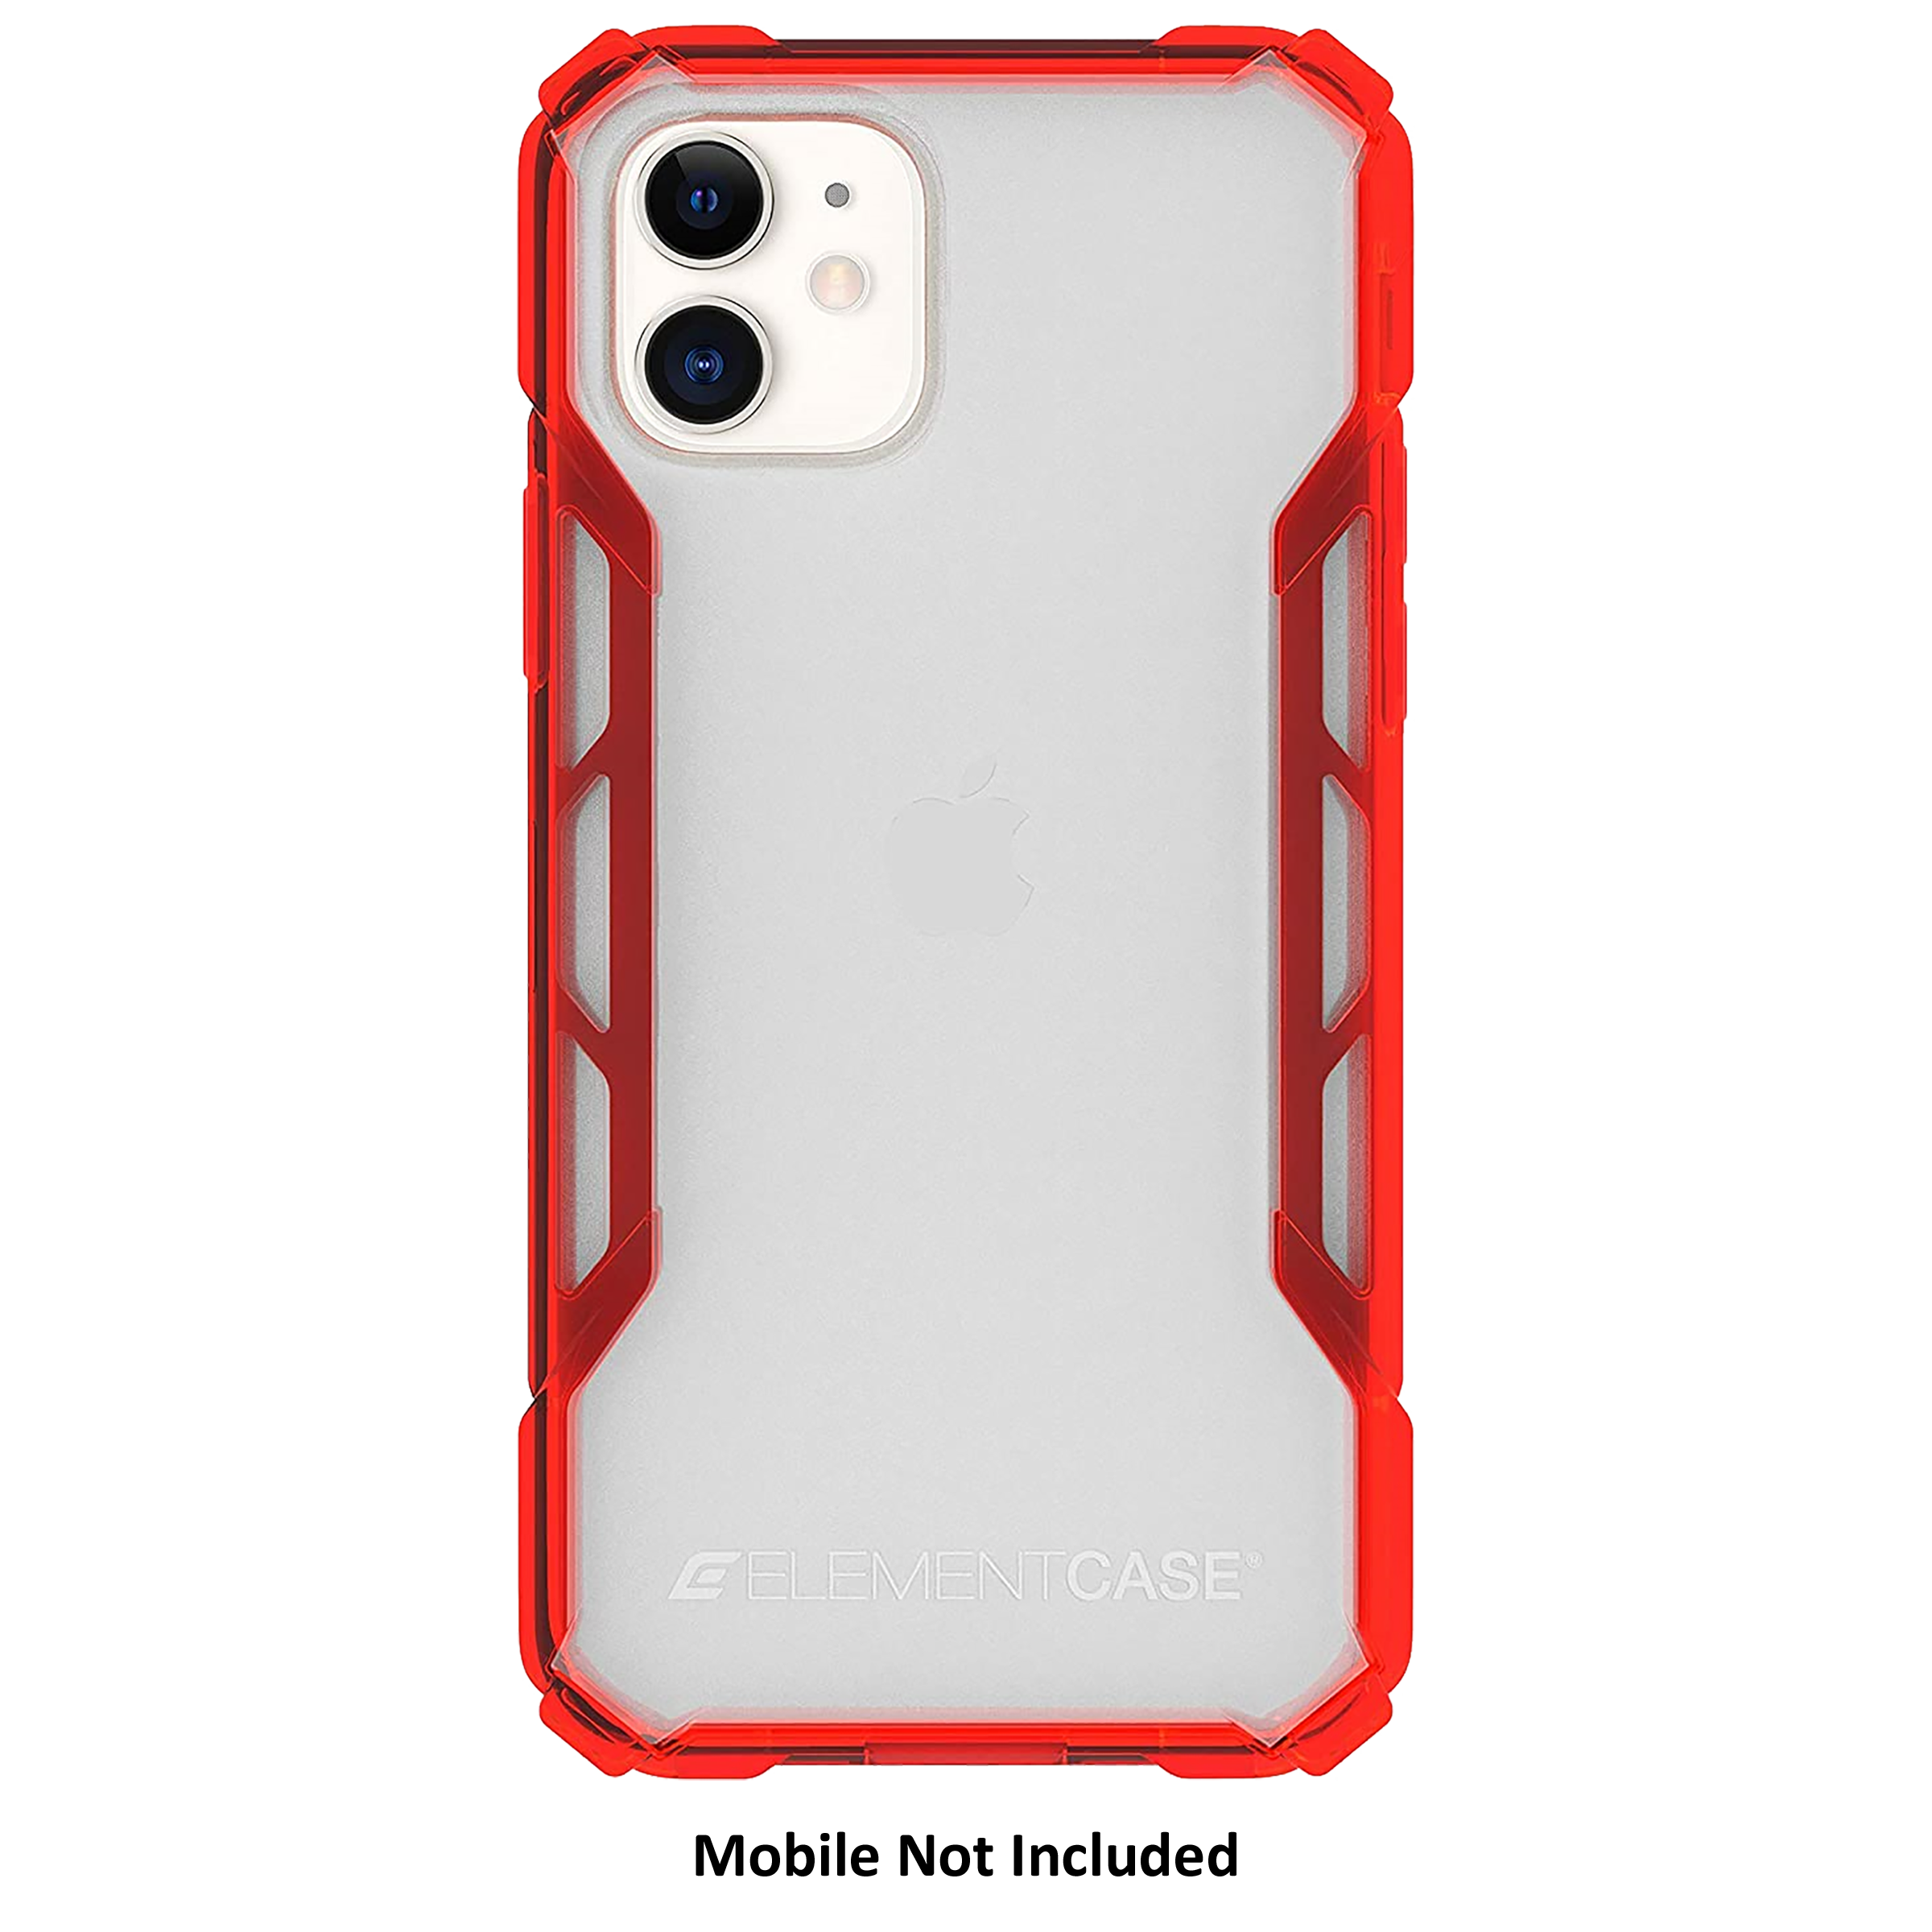 Element Case Rally Polycarbonate Back Case For iPhone 11 (Mil-Spec Drop Protection, EMT-322-225F-03, Red)_3